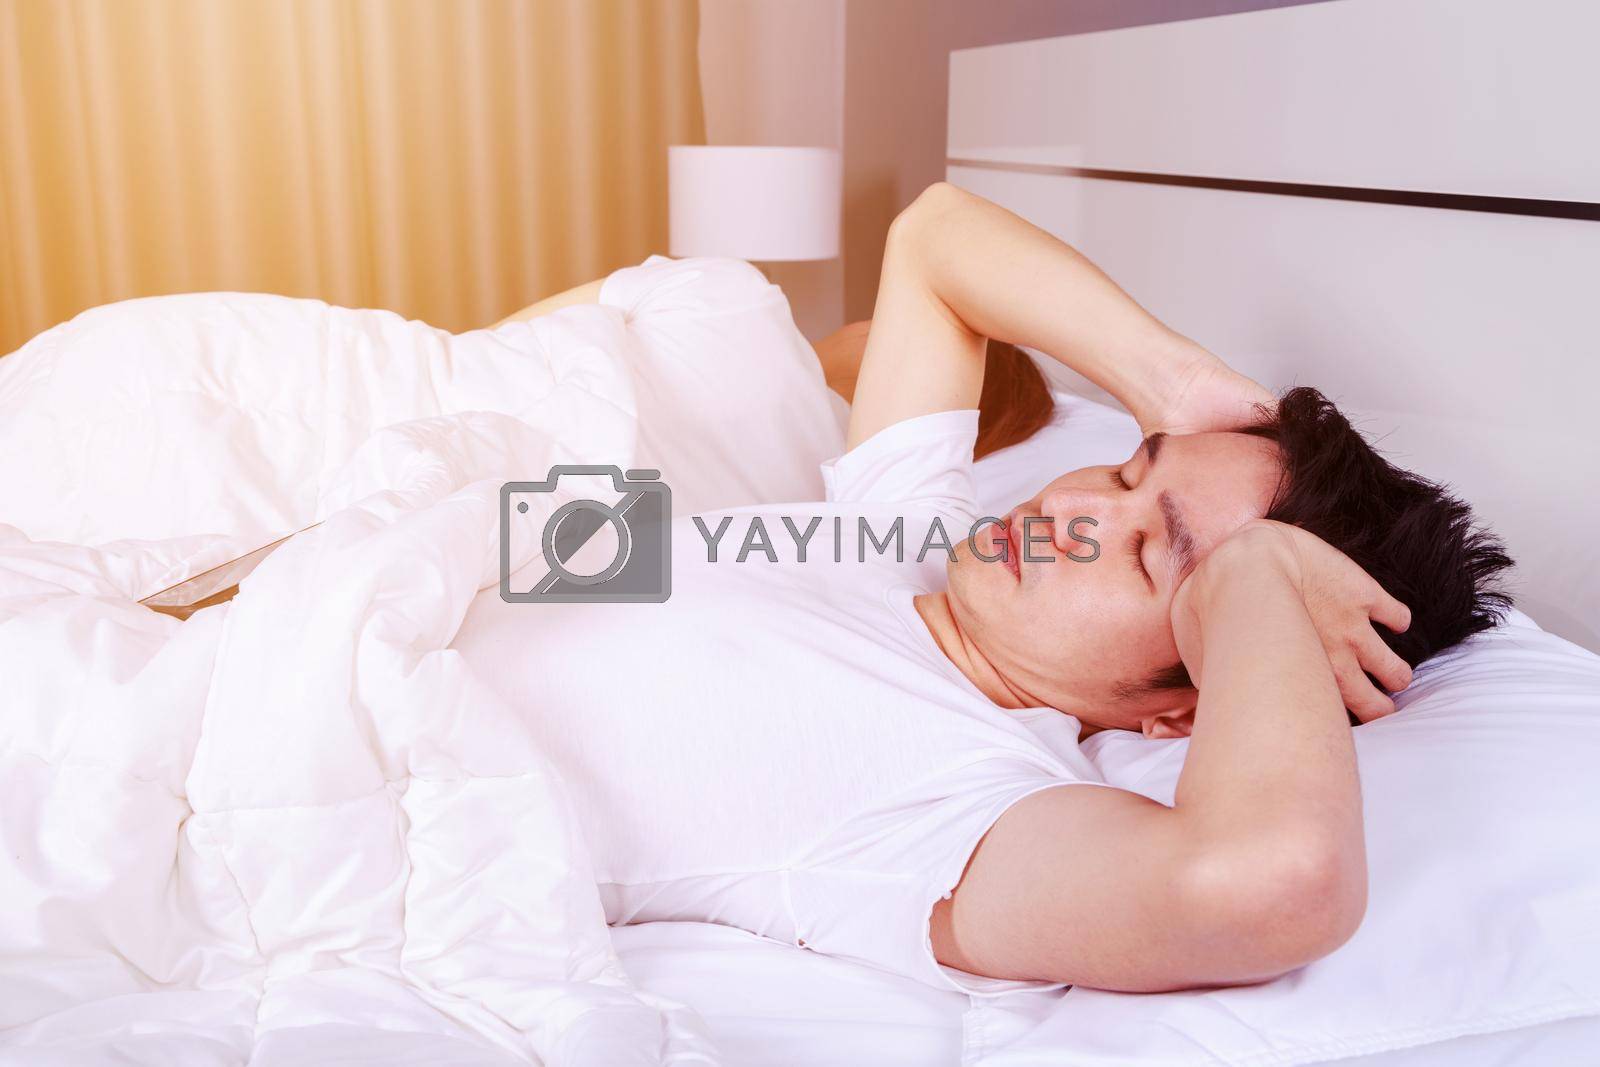 Royalty free image of man having sleepless on bed and having migraine,stress, insomnia, hangover in bedroom by geargodz